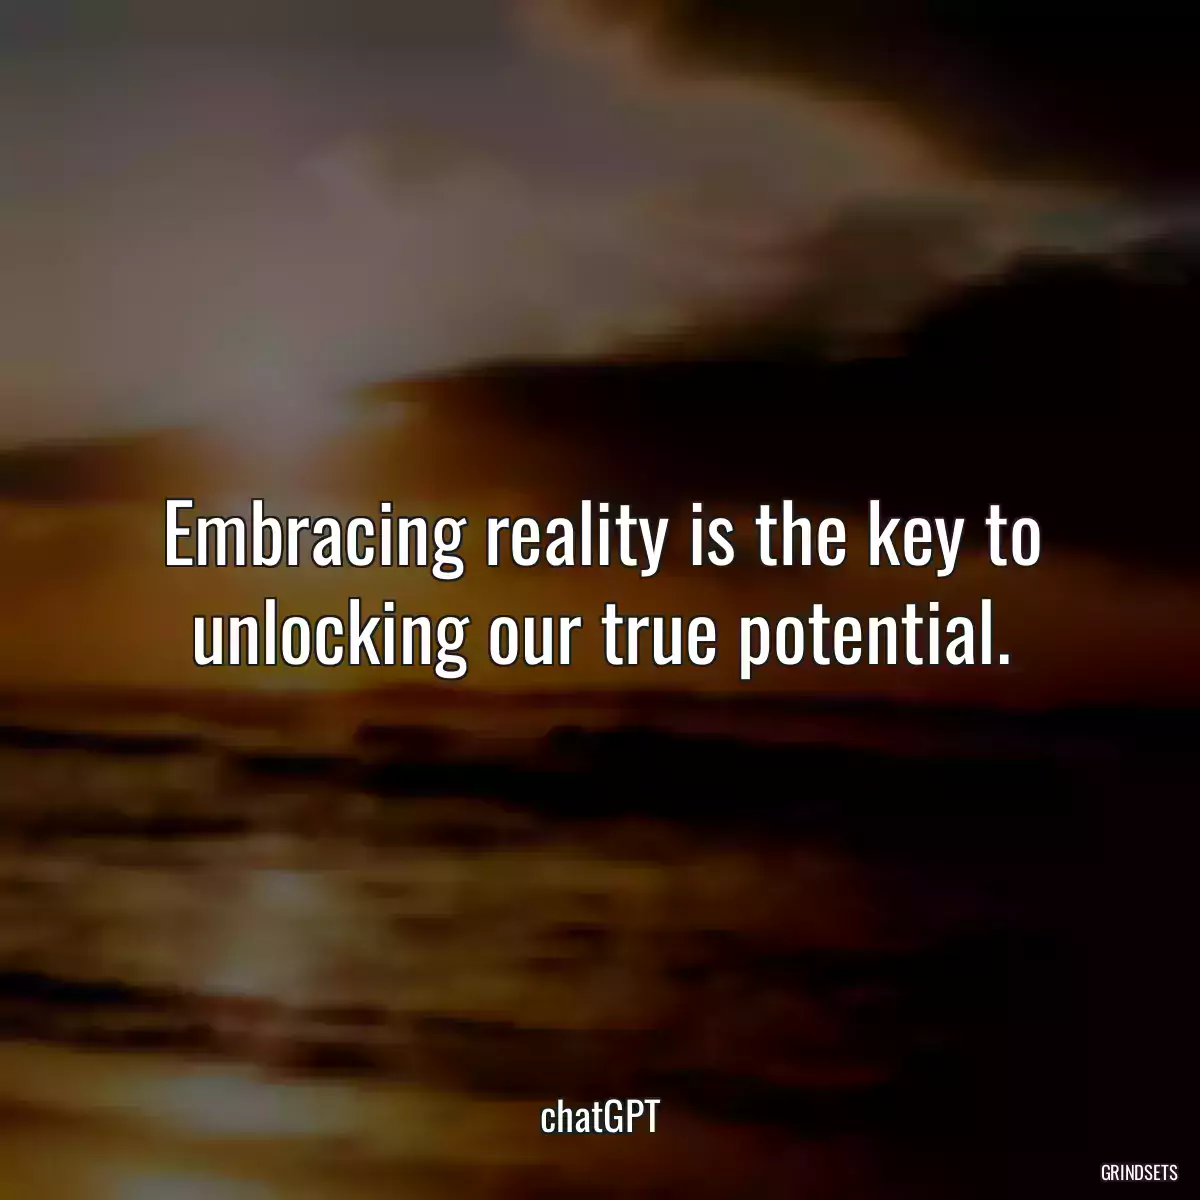 Embracing reality is the key to unlocking our true potential.